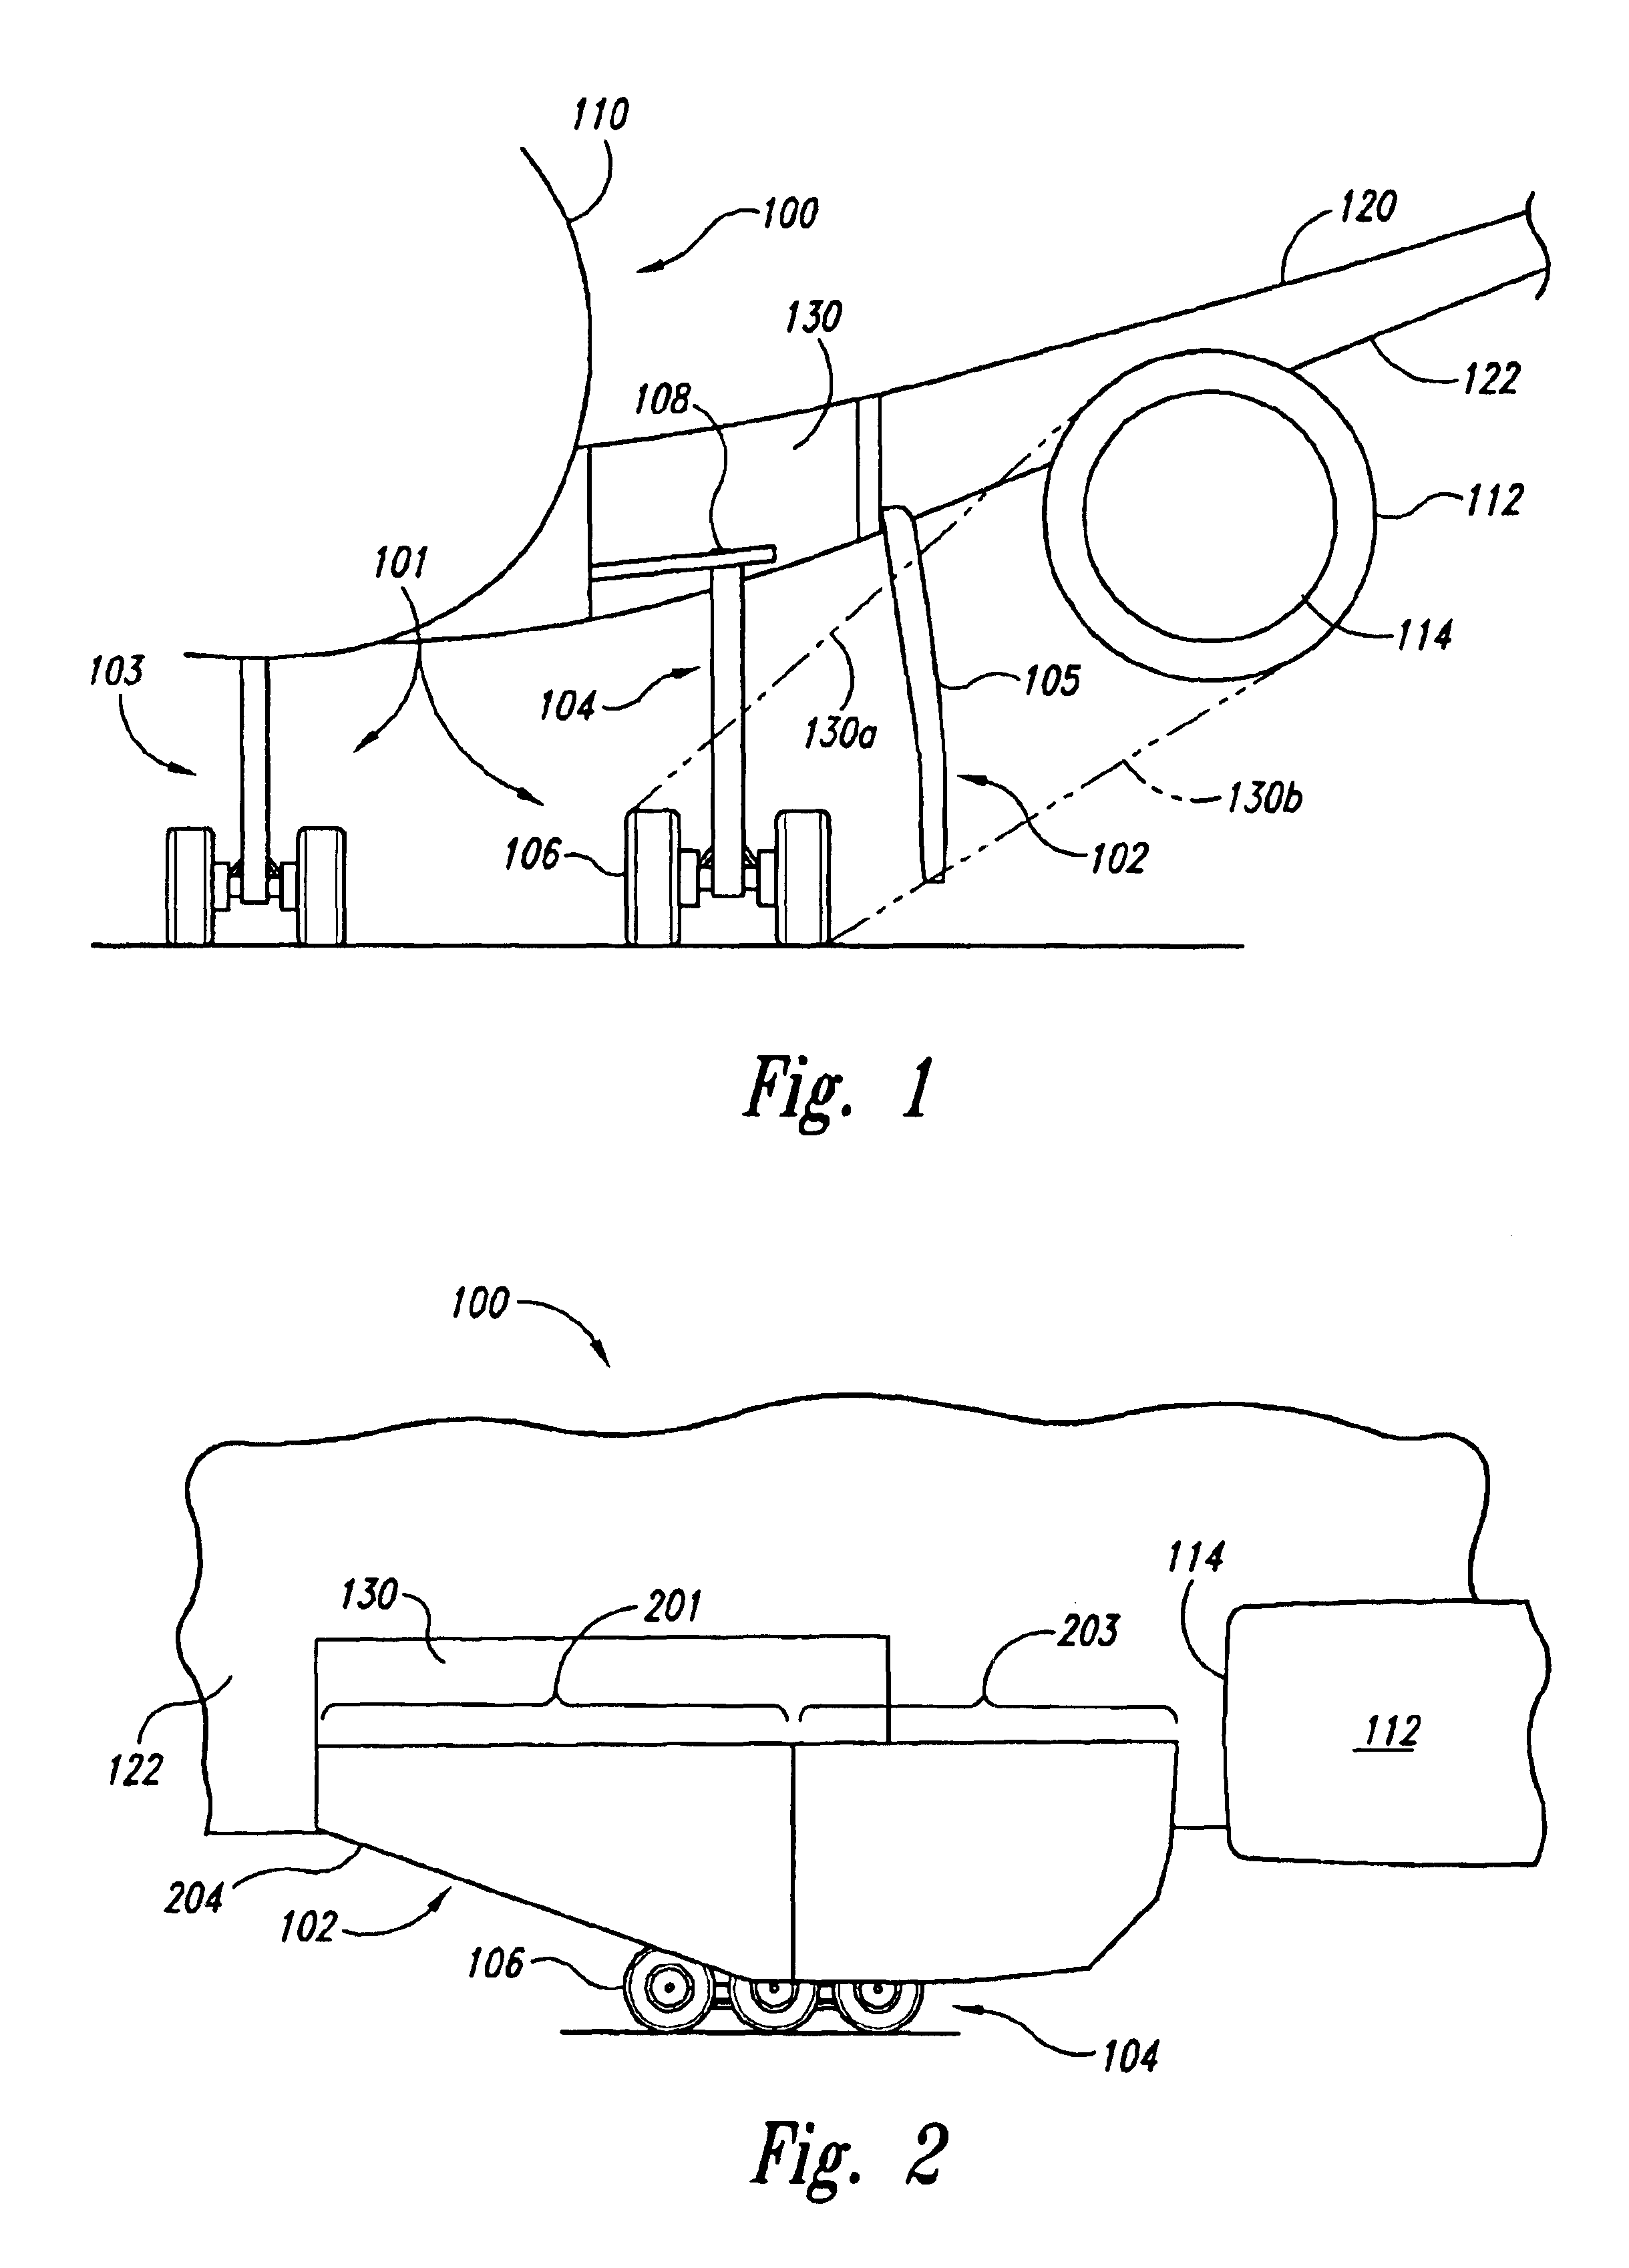 Apparatuses and methods for preventing foreign object damage to aircraft engines